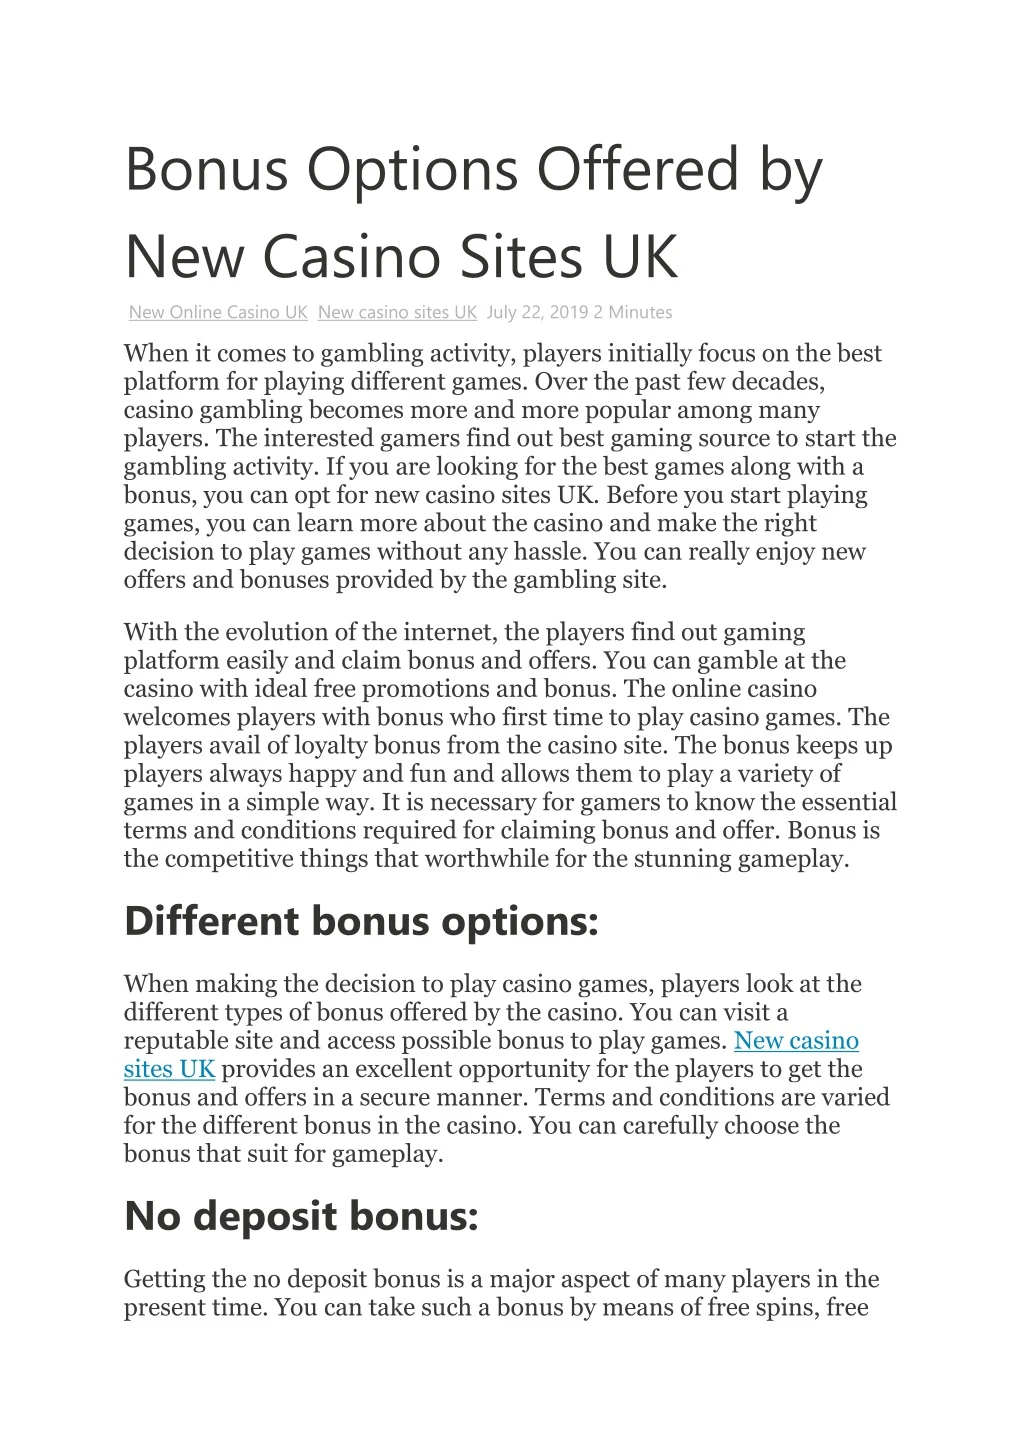 bonus options offered by new casino sites n.